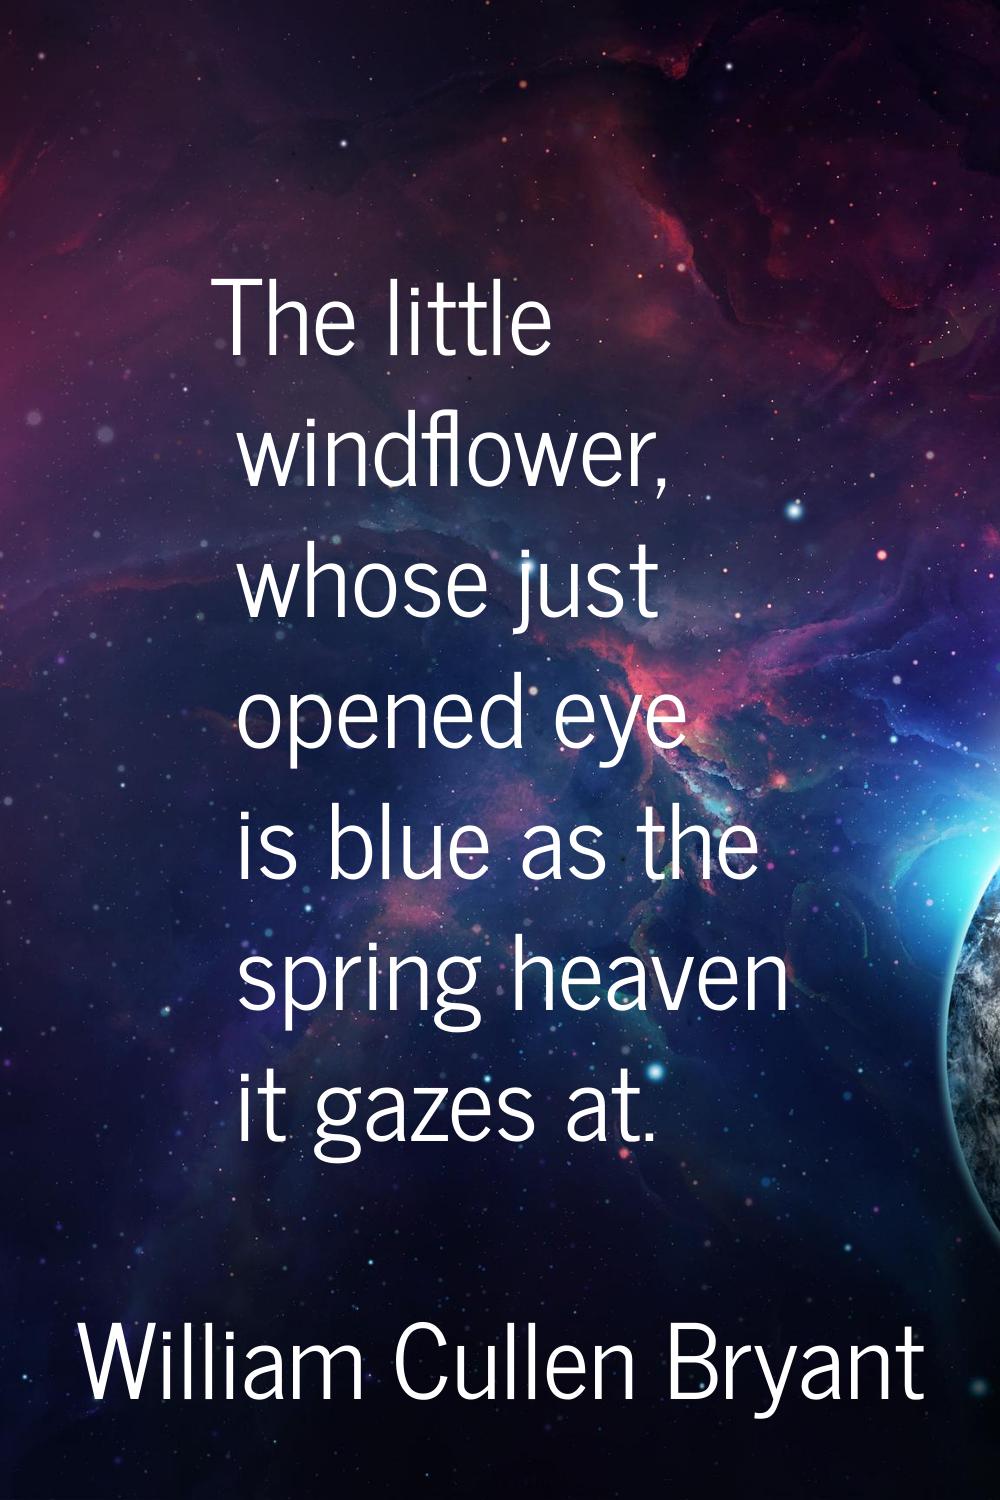 The little windflower, whose just opened eye is blue as the spring heaven it gazes at.